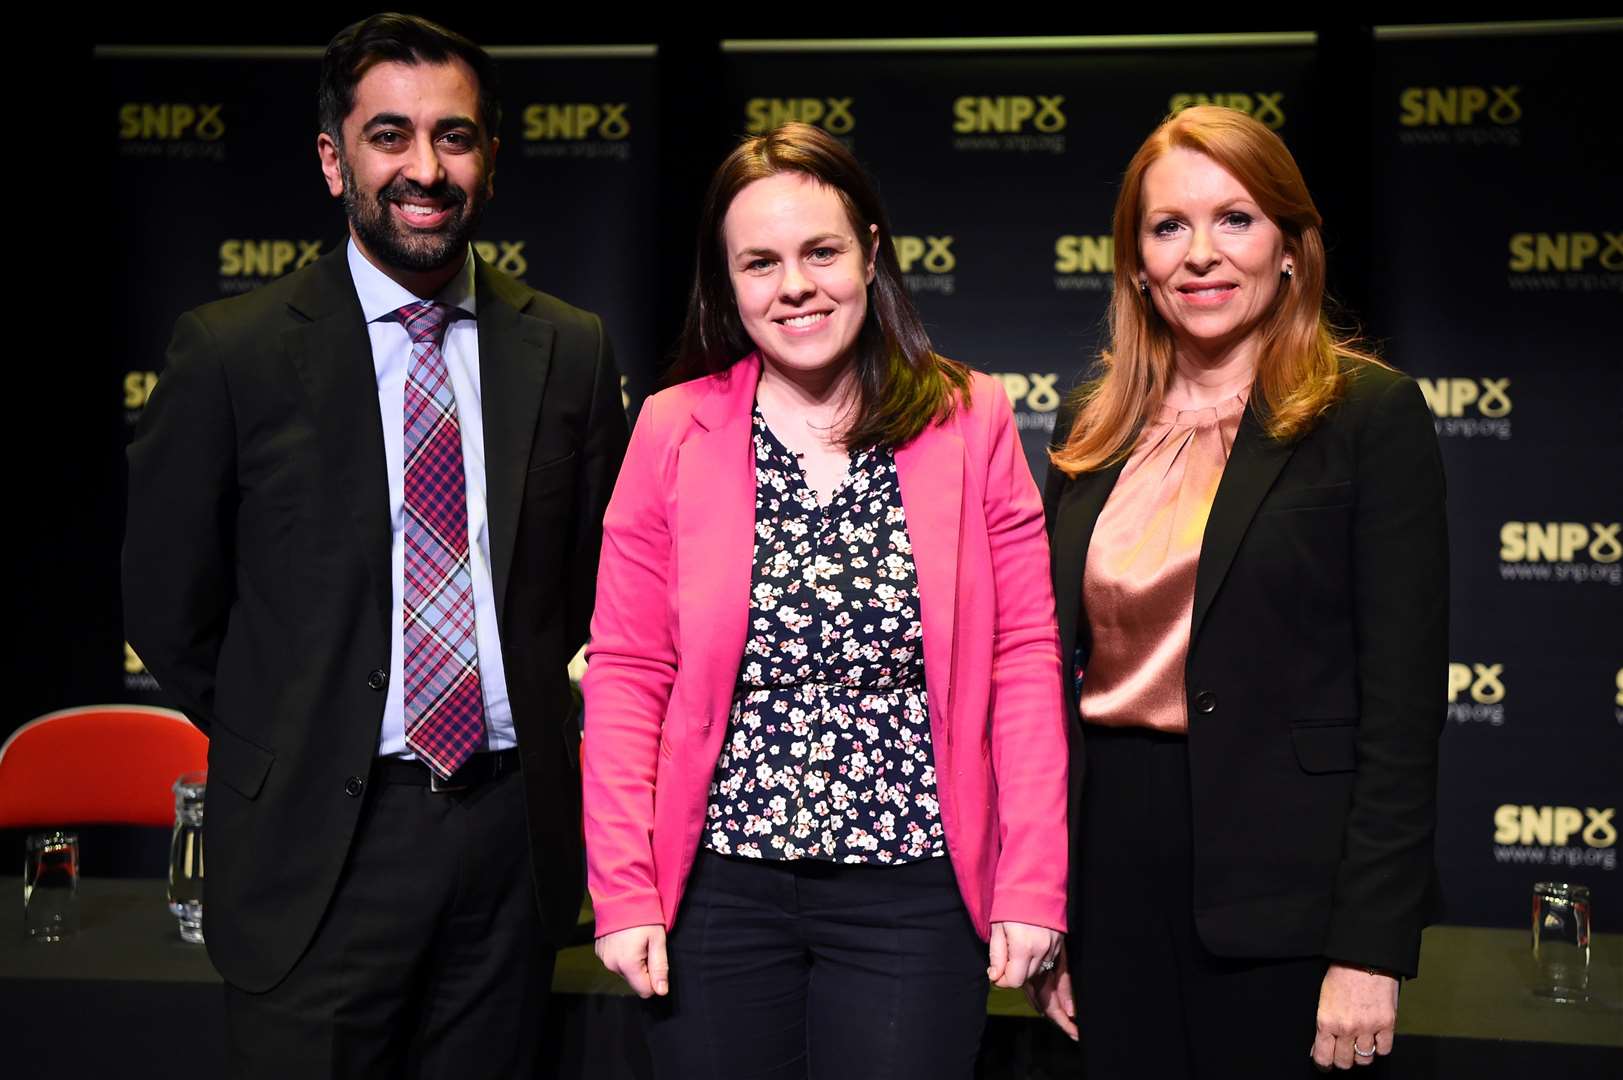 Humza Yousaf went up against Kate Forbes, centre, and Ash Regan in the SDNP leadership contest (Andy Buchanan/PA)